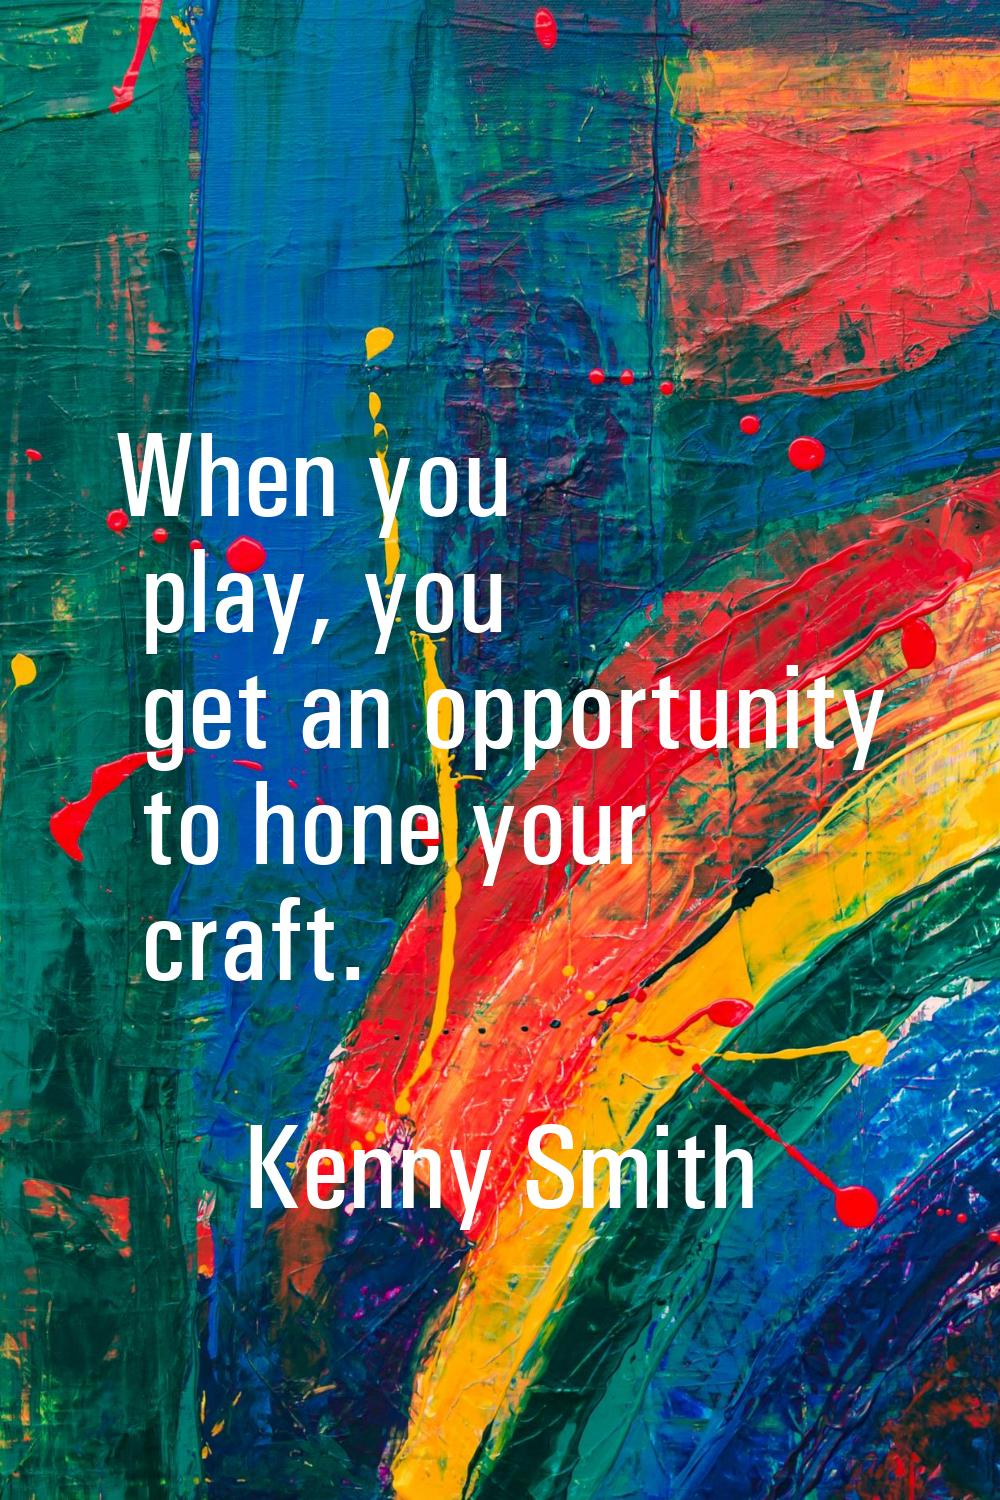 When you play, you get an opportunity to hone your craft.